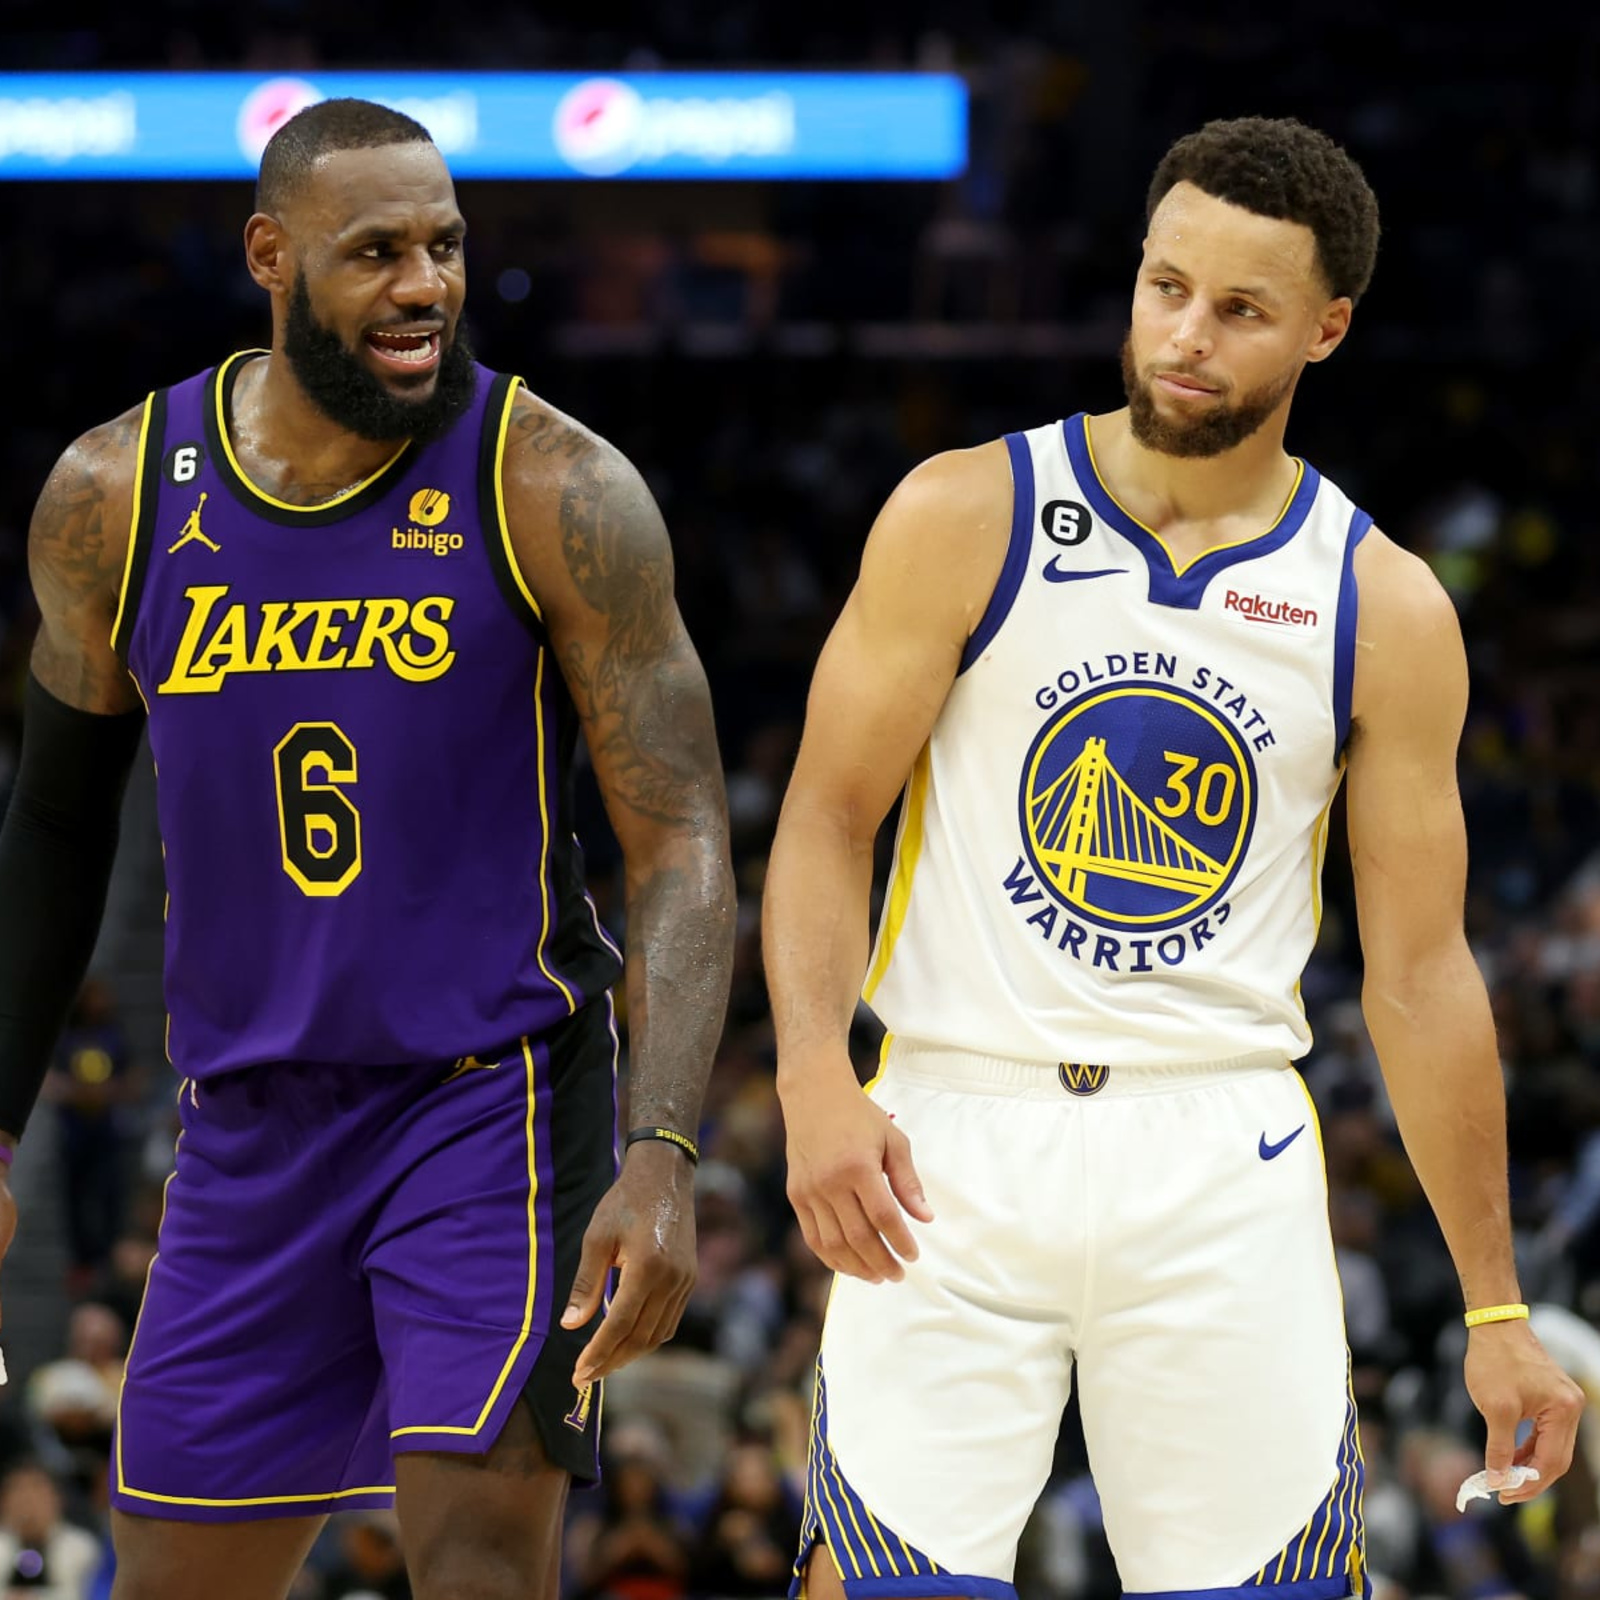 Warriors, Lakers and Bruins make sports history, for better or